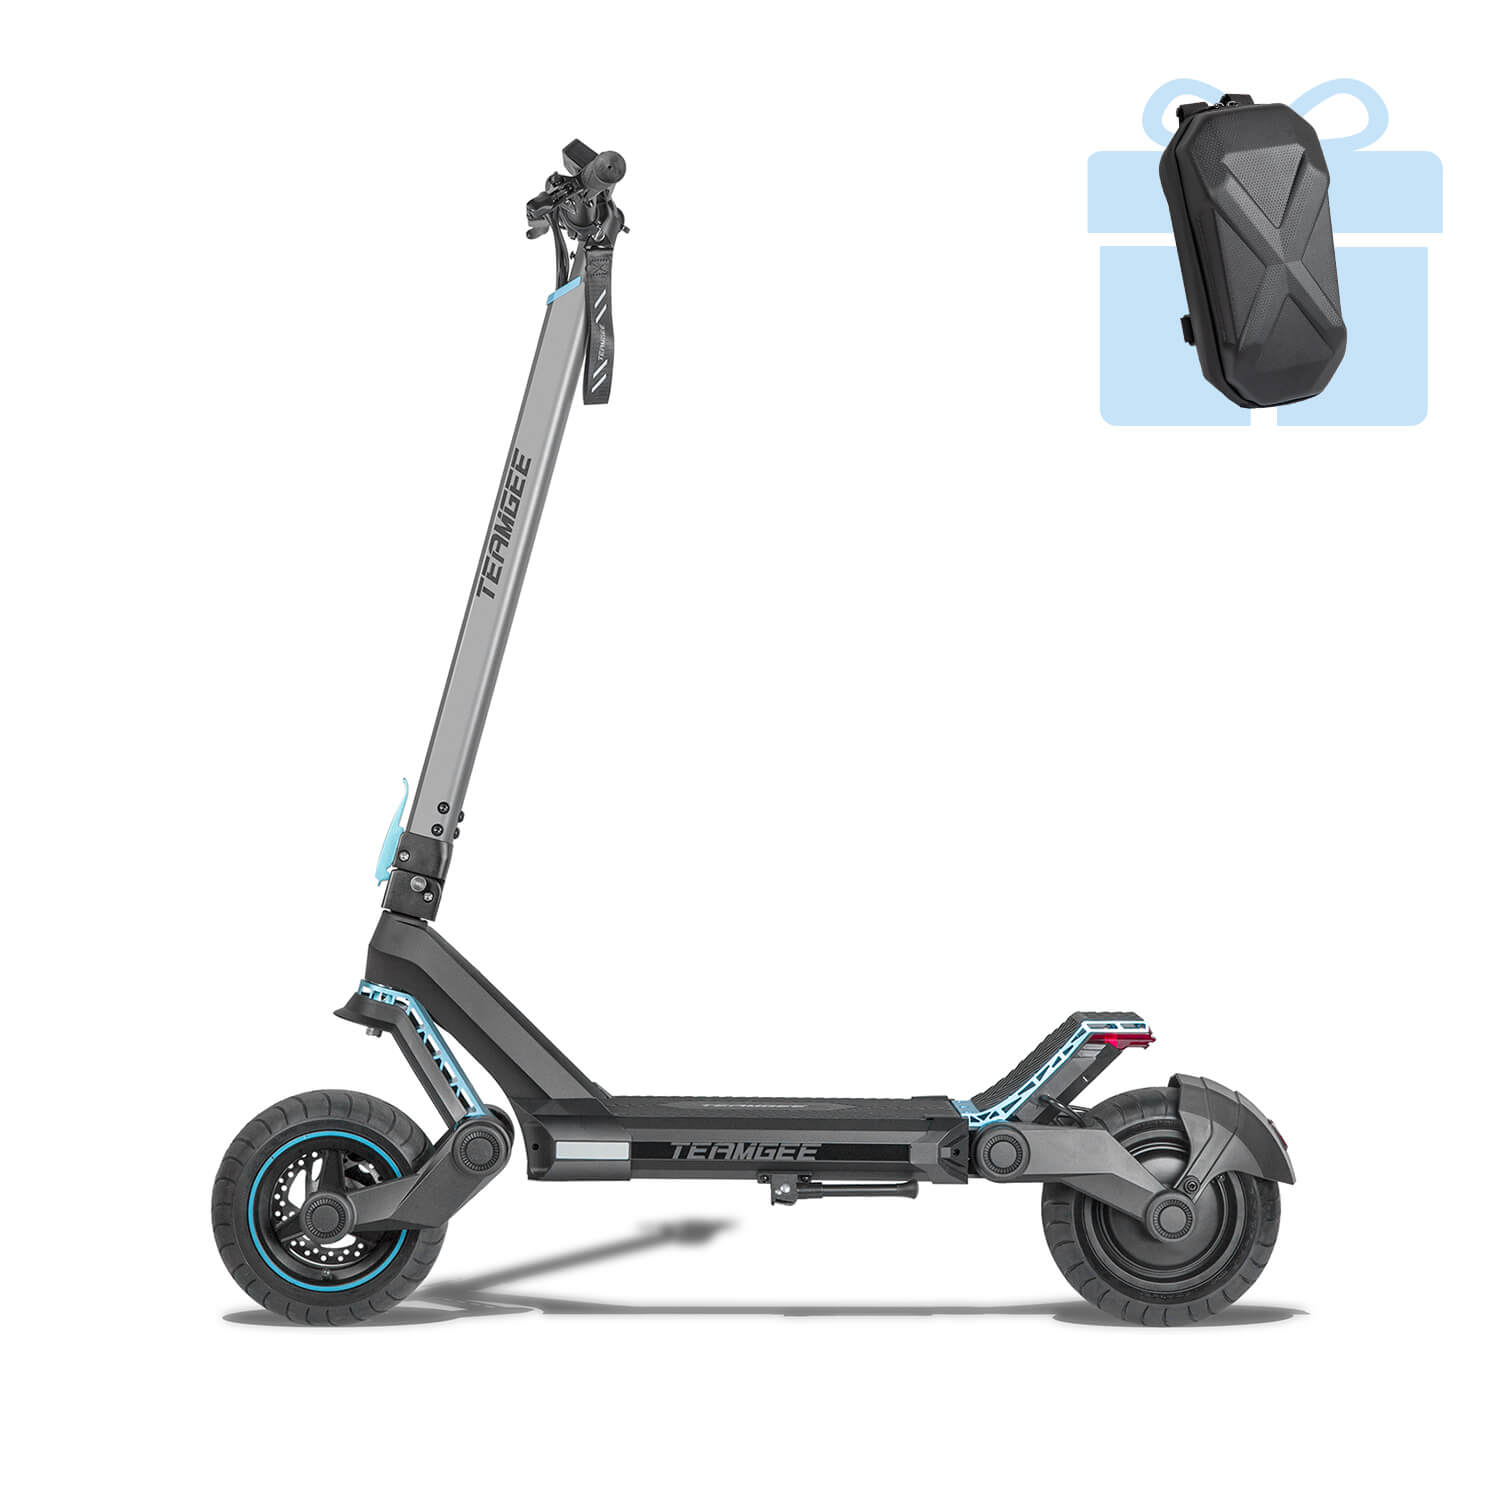 Teamgee G3 Electric Scooter For Commuting & Cruising